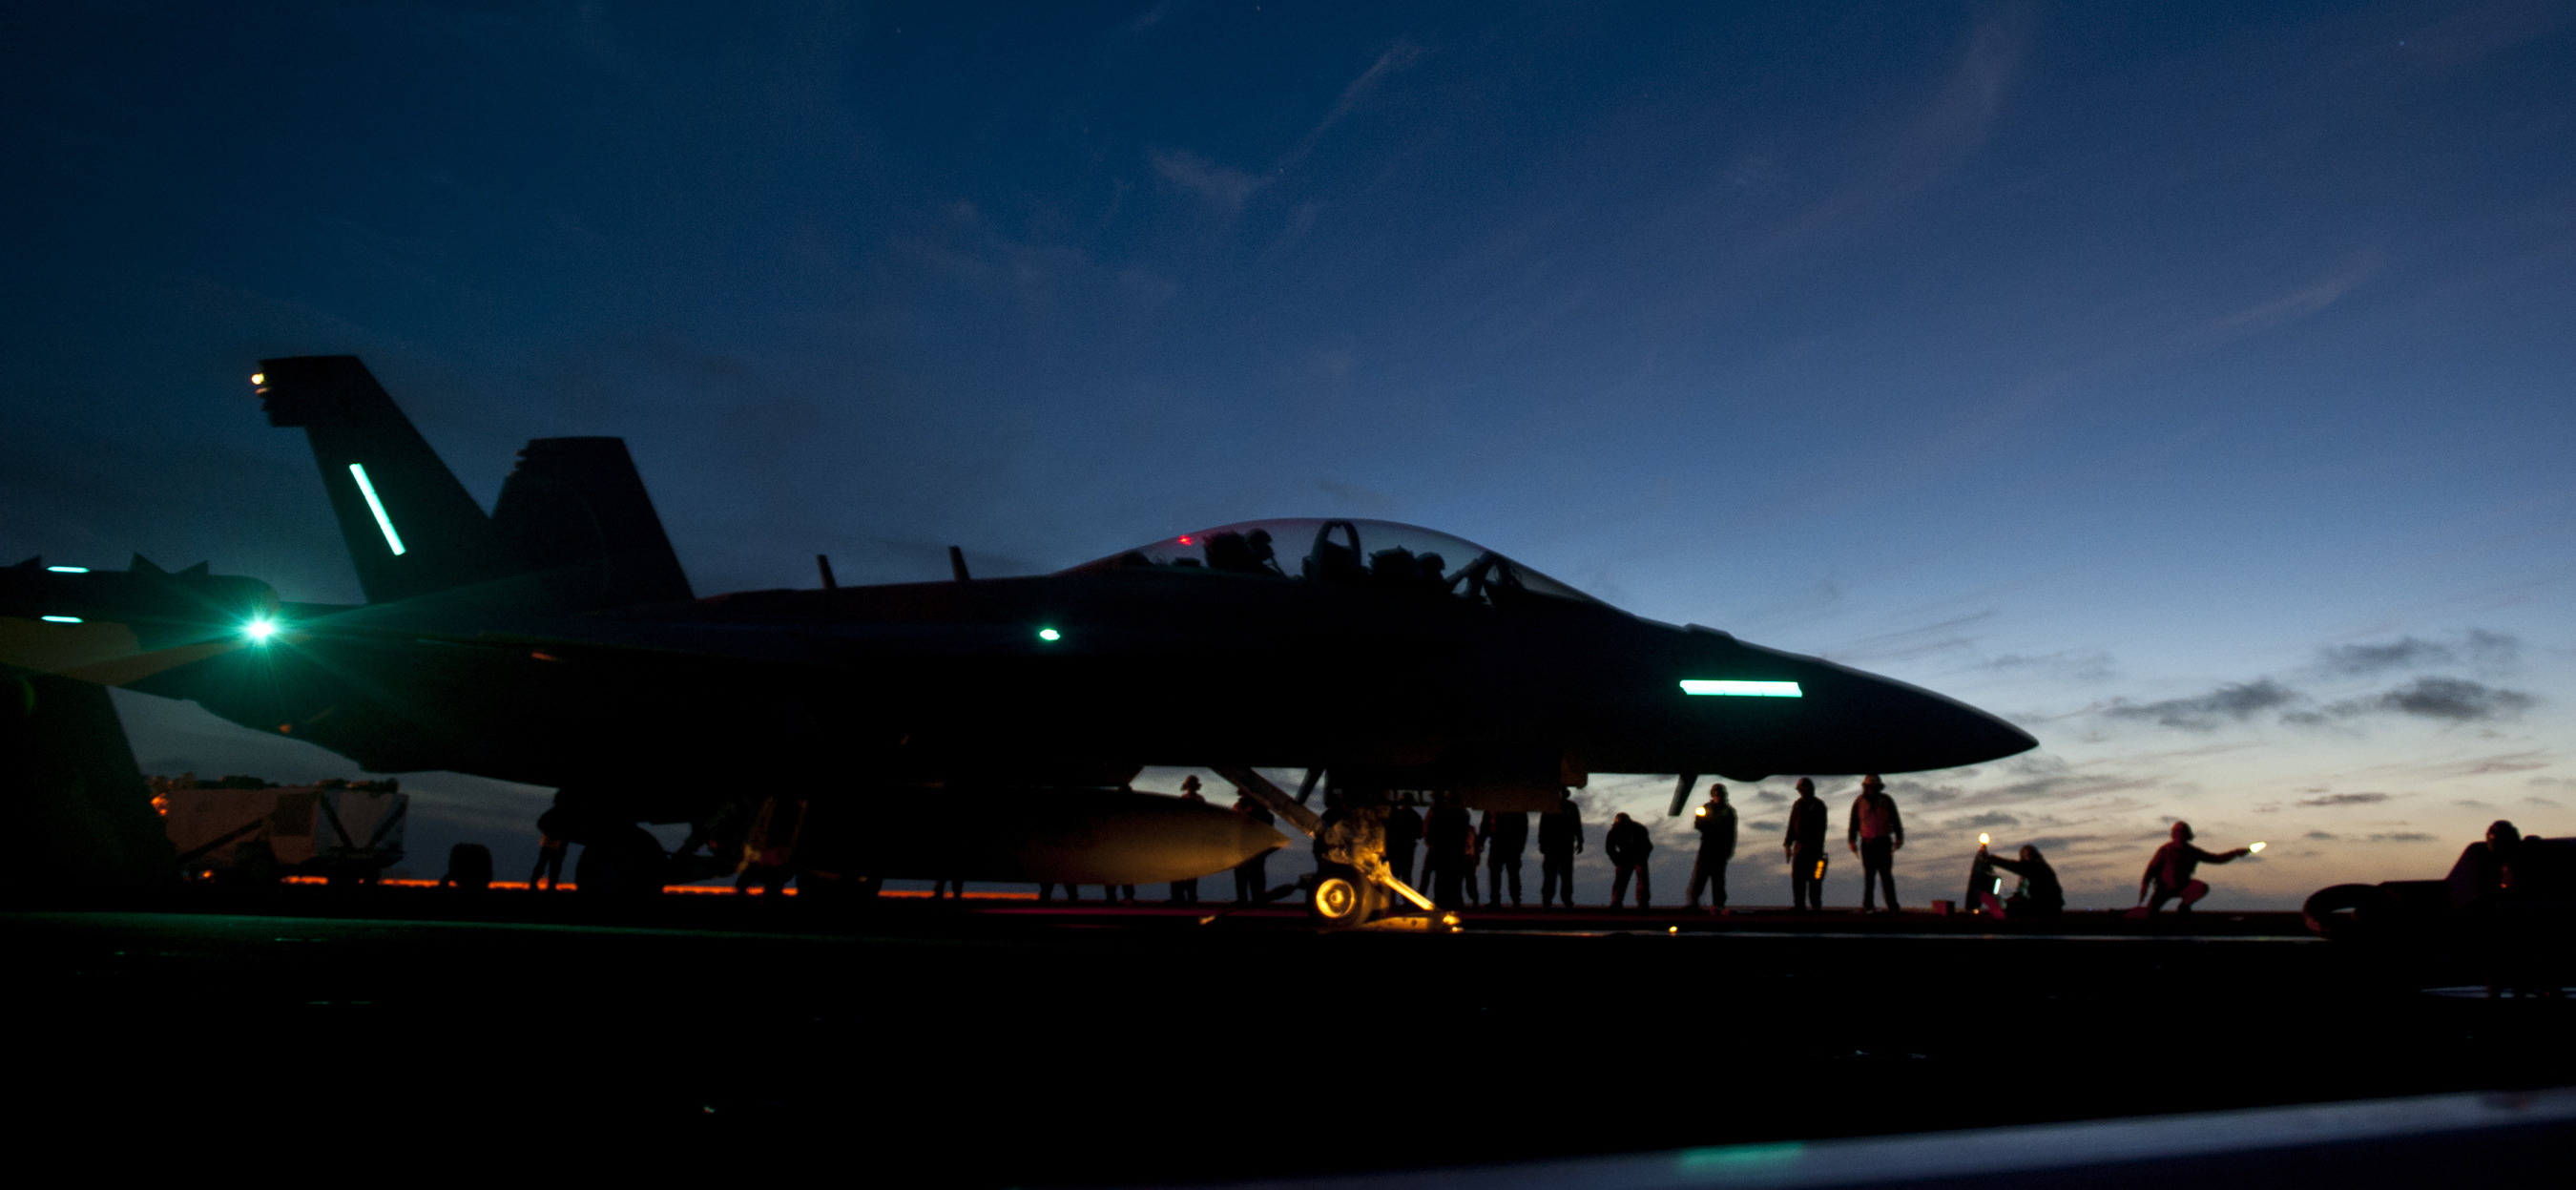 EA-18G Growler from Electronic Attack Squadron (VAQ) 129 during night flight operations aboard the aircraft carrier USS Carl Vinson (CVN-70). US Navy Photo